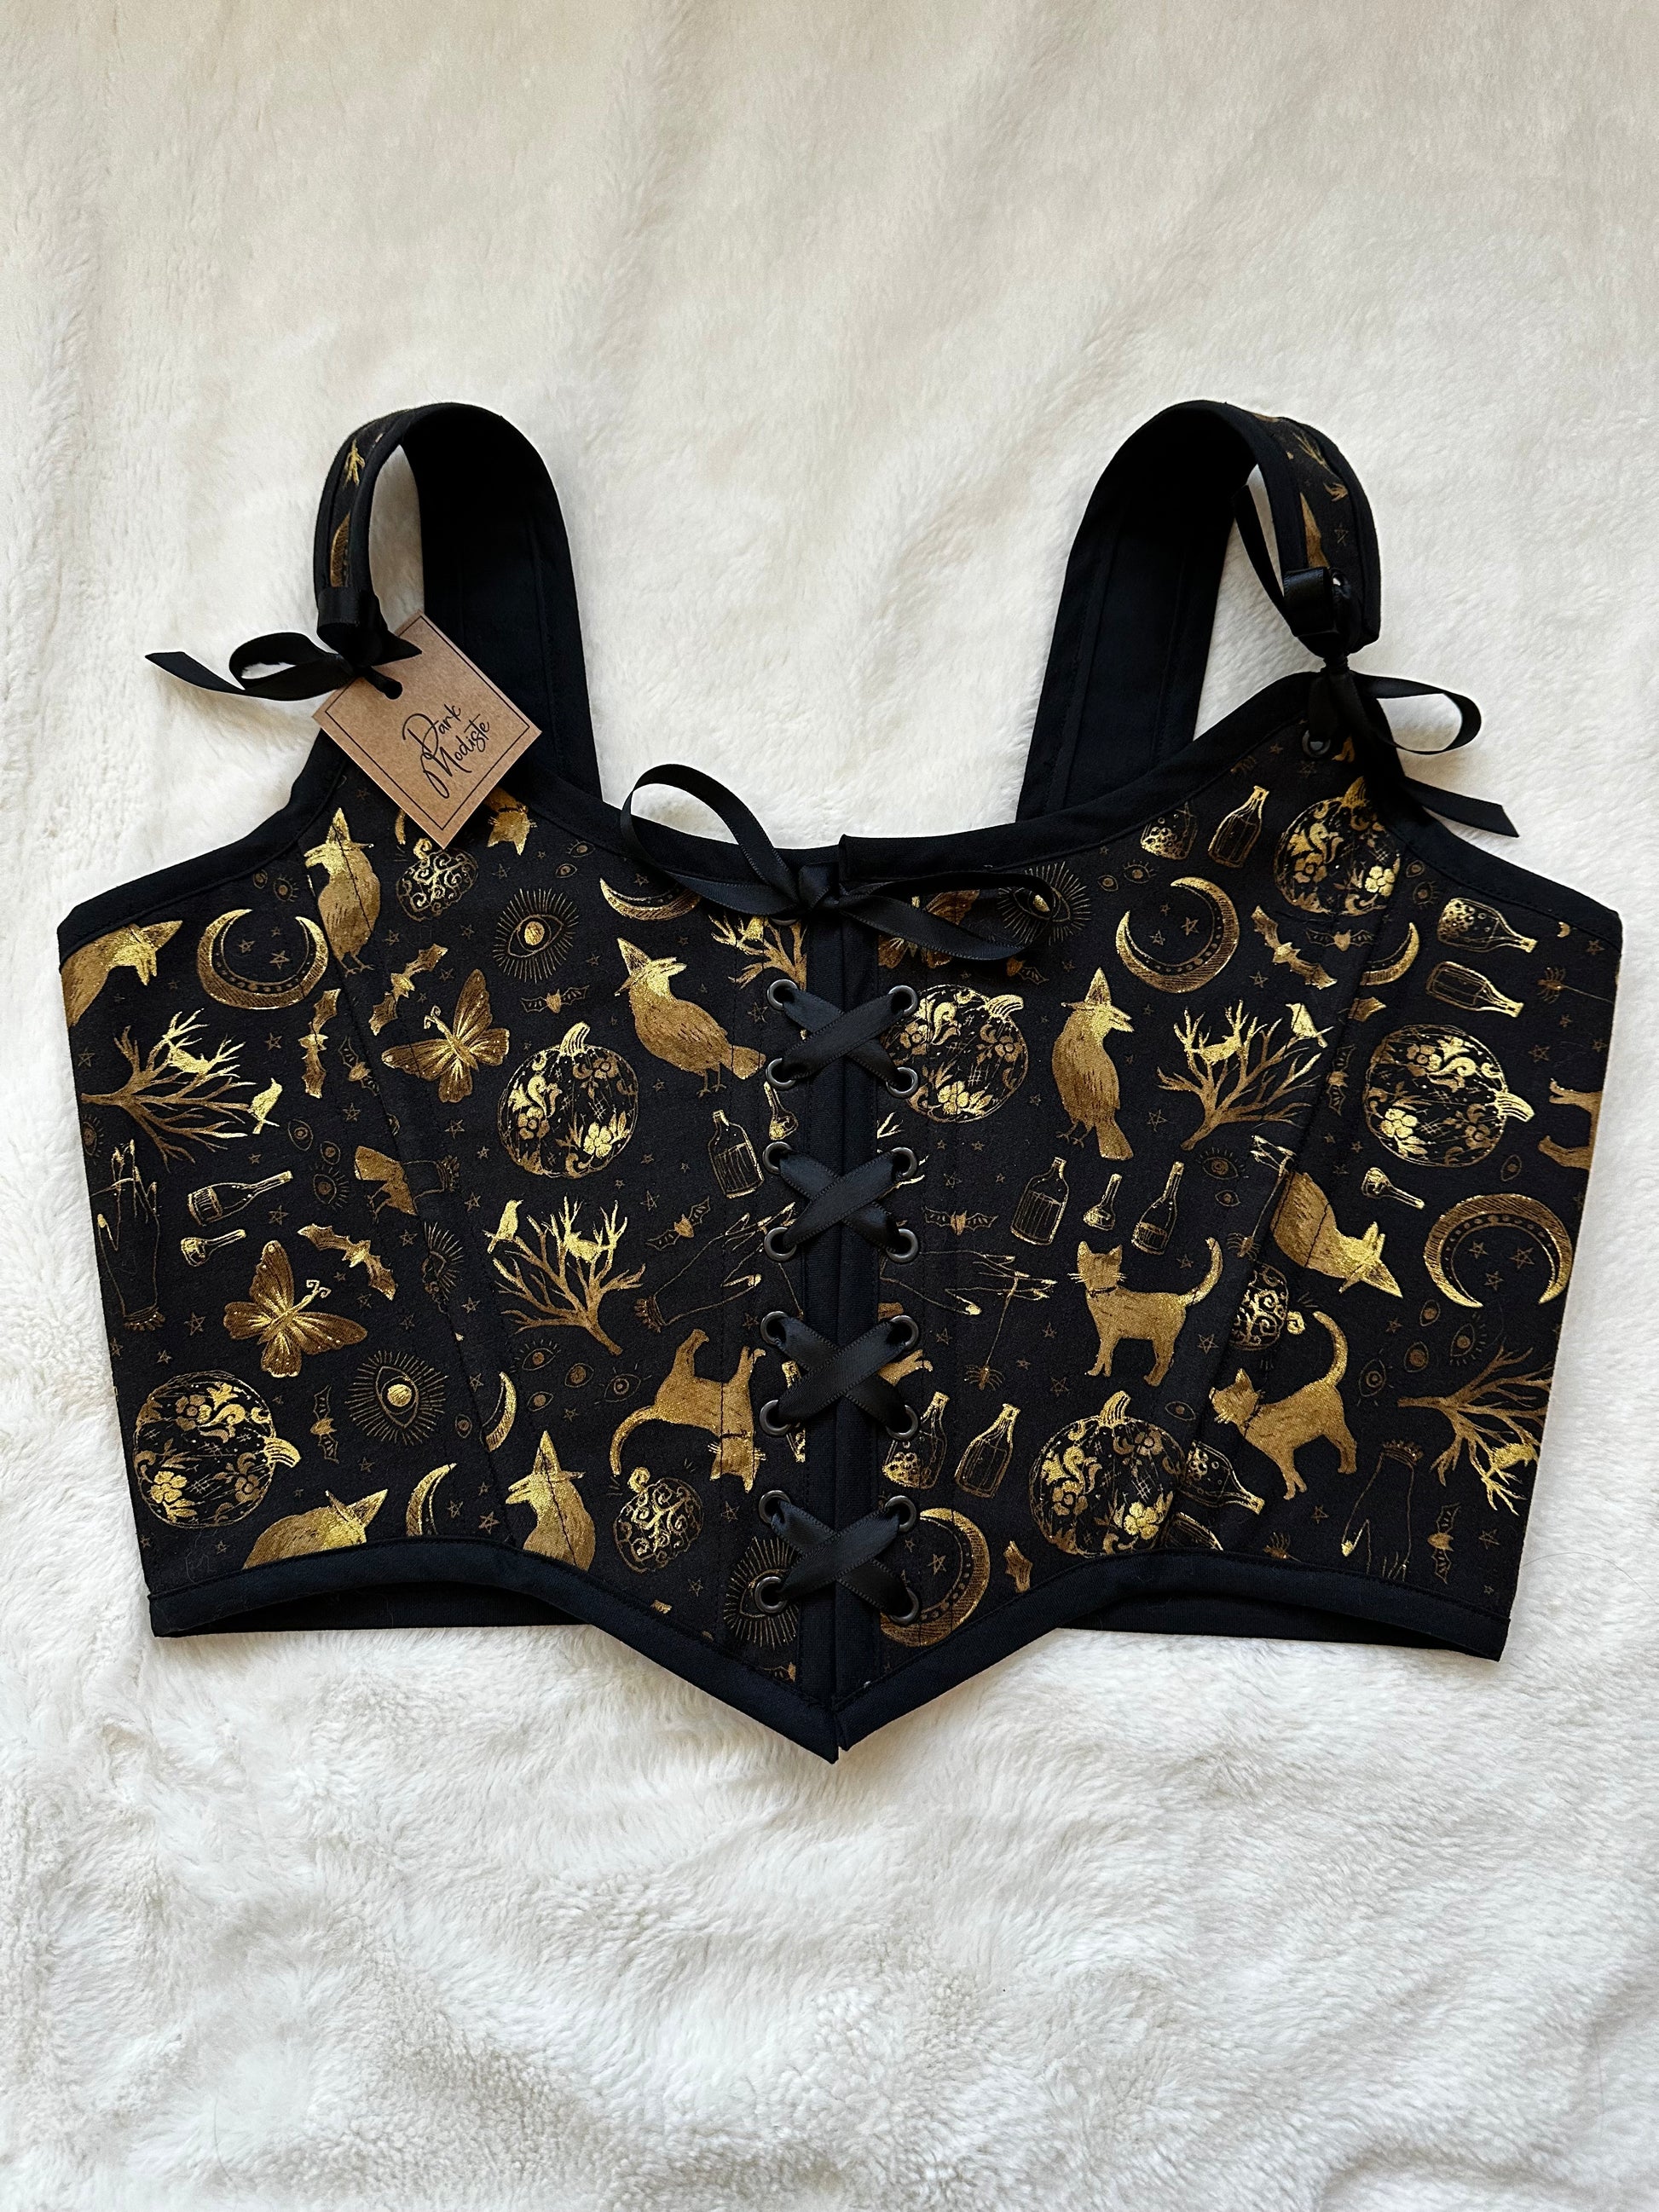 Renaissance bodice in black fabric with gold patterned print. Pattern contains cats, trees, moons, bottles, and moths in gold. Black ribbon is tied in the middle and in the straps. There is a "Dark Modiste" tag in the left strap. Bodice is on a white fuzzy blanket.